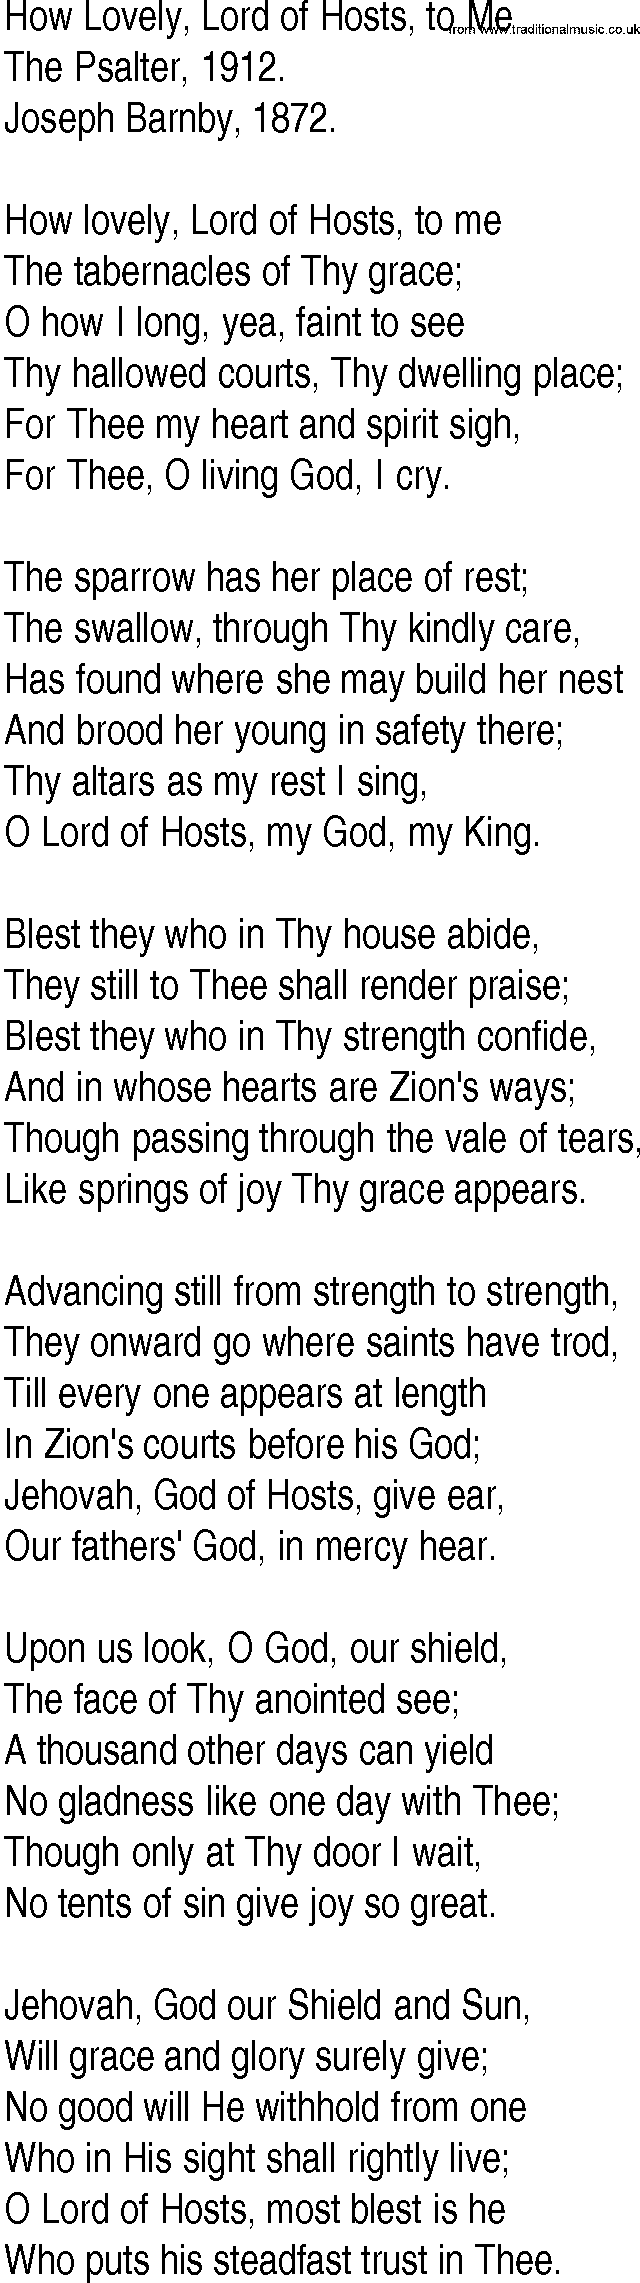 Hymn and Gospel Song: How Lovely, Lord of Hosts, to Me by The Psalter lyrics